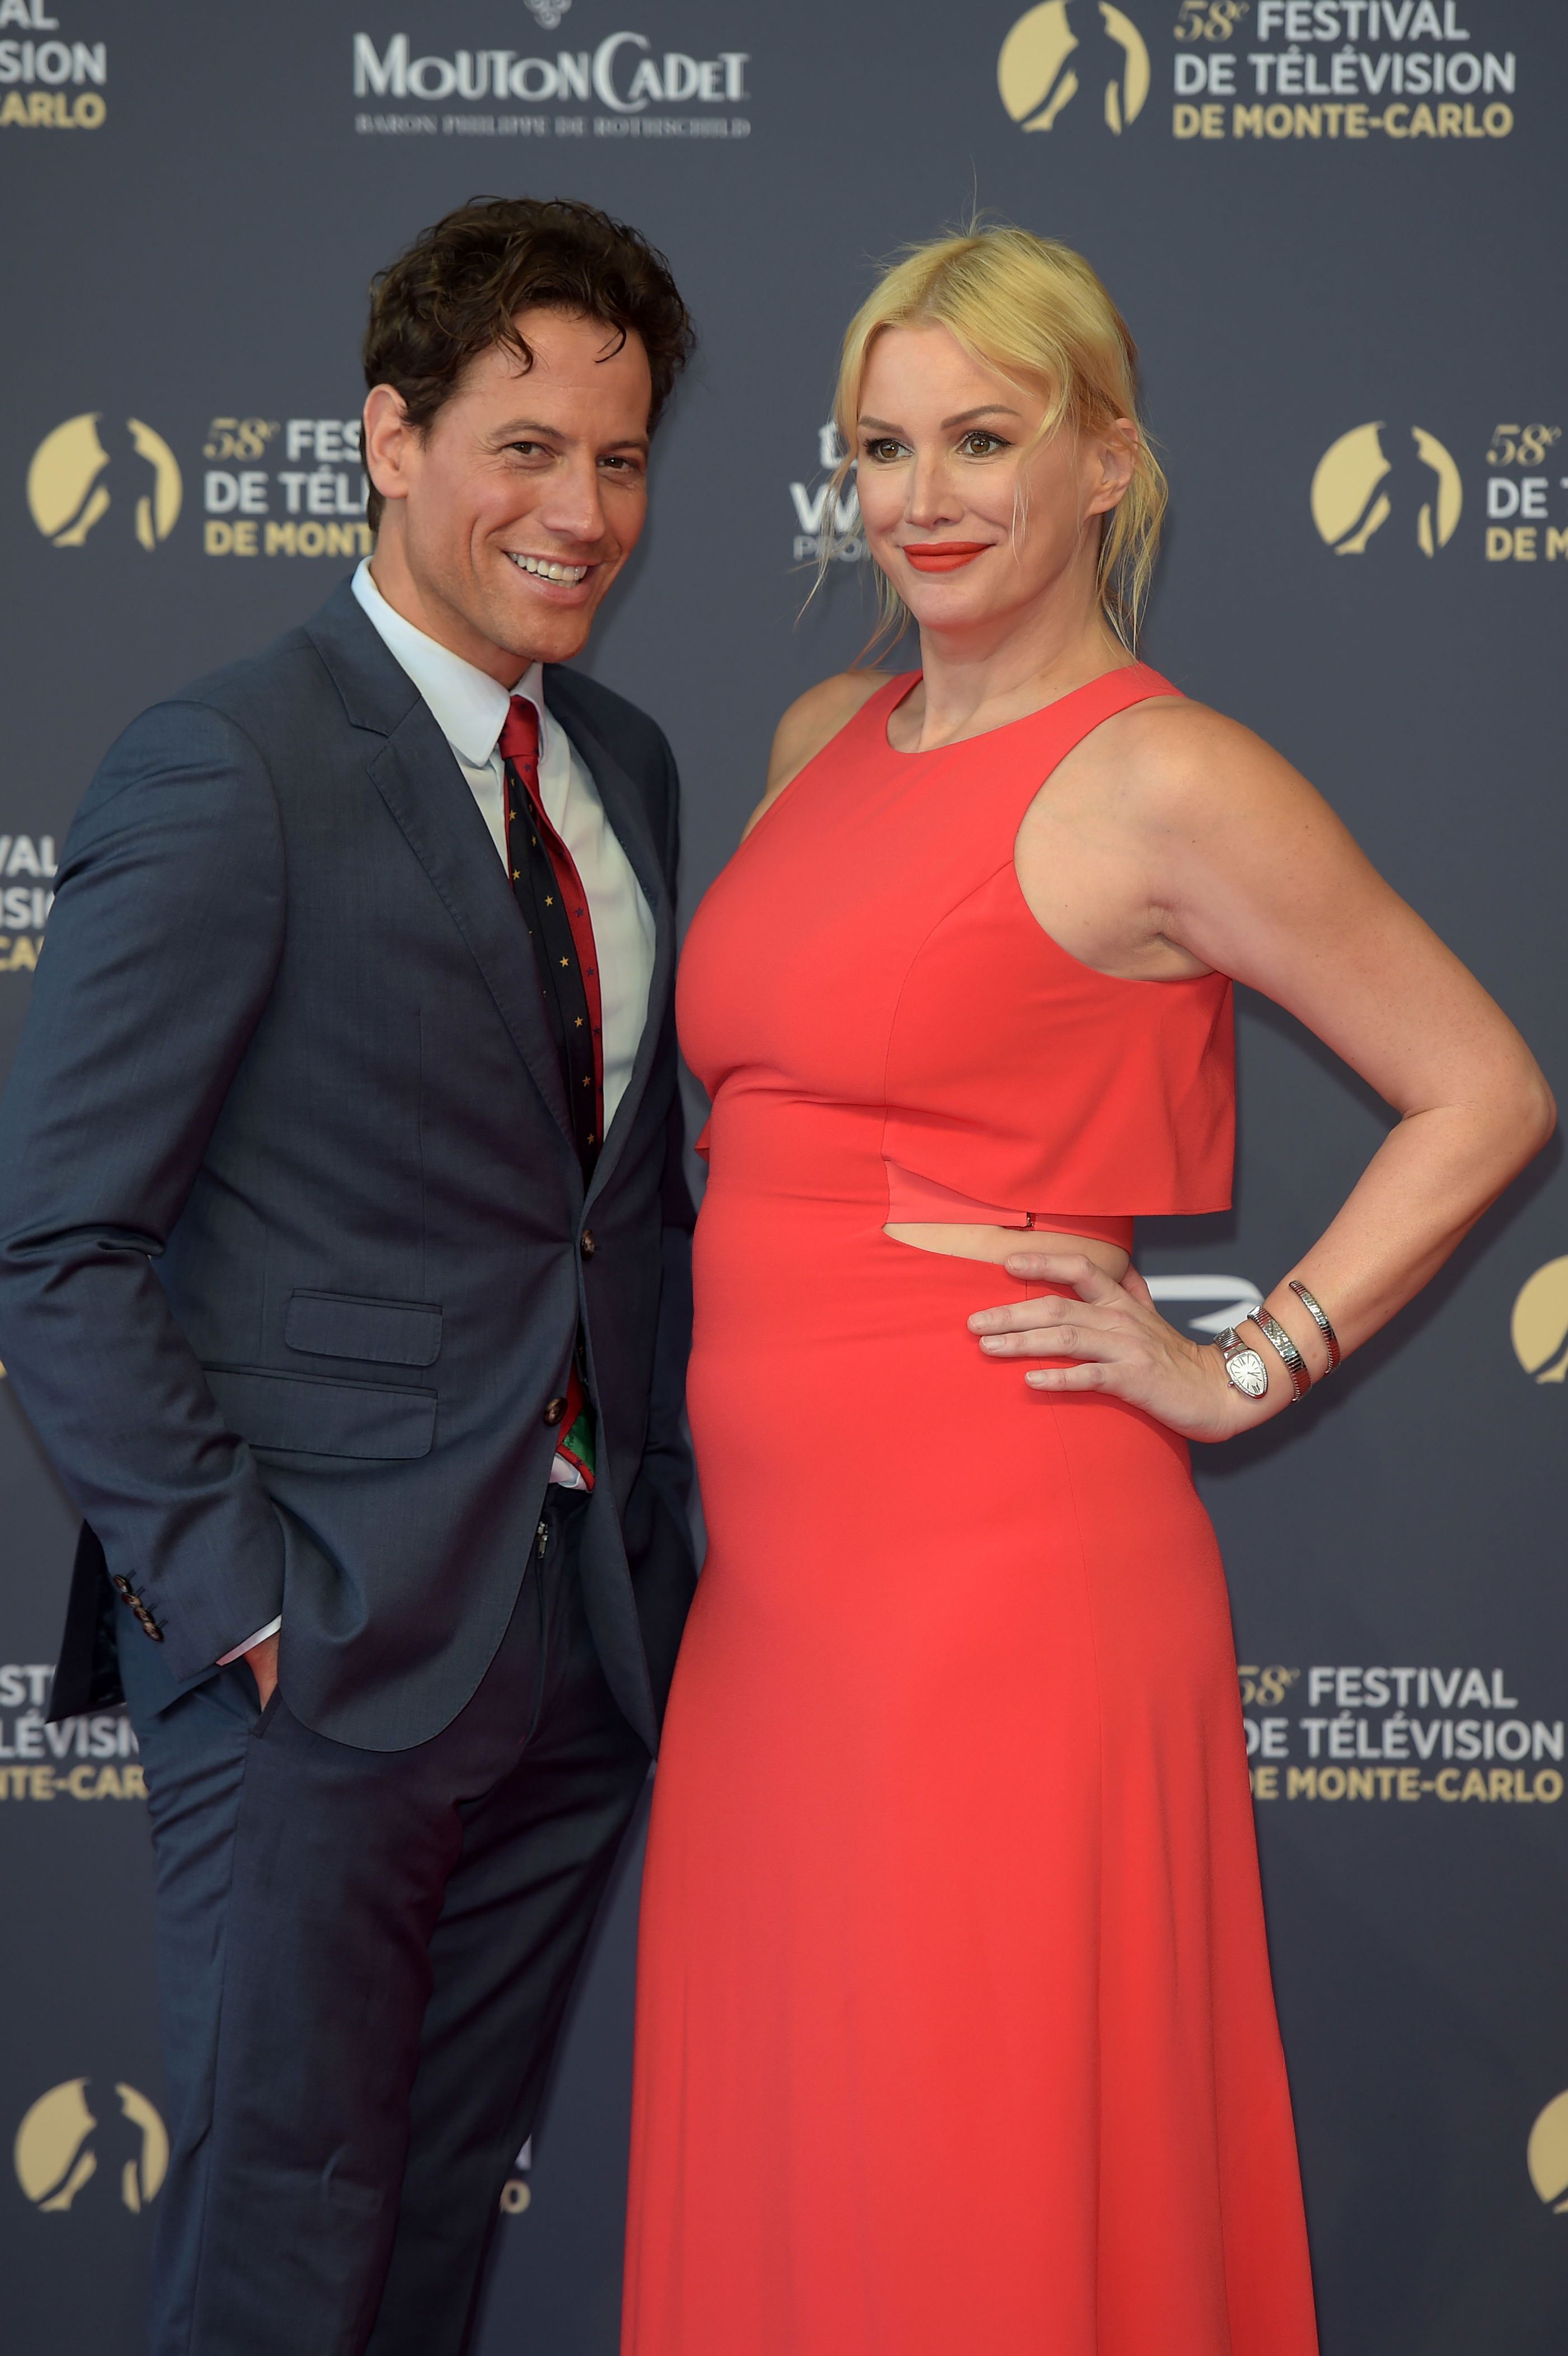 <p>Take a look back at some of Hollywood's most notable cheating scandals, starting with this drama...</p><p>Ioan Gruffudd -- who turns 50 on Oct. 6, 2023 -- made headlines in 2021 when his estranged wife accused him of cheating. Right after the "Fantastic Four" star went Instagram official with the new woman in his wife, Bianca Wallace, actress Alice Evans claimed Ioan had been unfaithful at the end of her marriage.</p><p><span>Alice tweeted at the time, "So it turns out that my husband, after two years of telling me I'm a bad person and I'm not exciting and he no longer want so to have sex with me and he just wants to be on set abroad... Has been in a relationship for THREE years behind all our backs. Good luck, Bianca." </span></p><p>This public declaration came seven months after Ioan filed for divorce following 13 years of marriage and two kids. Their contentious split -- which included custody issues and Ioan filing a domestic violence restraining order against Alice -- was finalized in 2023. The Welsh actor and his alleged mistress are still together today. </p><p><em>Keep reading for more celebrity cheating scandals...</em></p><p>MORE: <a href="https://www.msn.com/en-us/community/channel/vid-kwt2e0544658wubk9hsb0rpvnfkttmu3tuj7uq3i4wuywgbakeva?item=flights%3Aprg-tipsubsc-v1a&ocid=social-peregrine&cvid=333aa5de5a654aa7a98a6930005e8f60&ei=2" rel="noreferrer noopener">Follow Wonderwall on MSN for more fun celebrity & entertainment photo galleries and content</a></p>